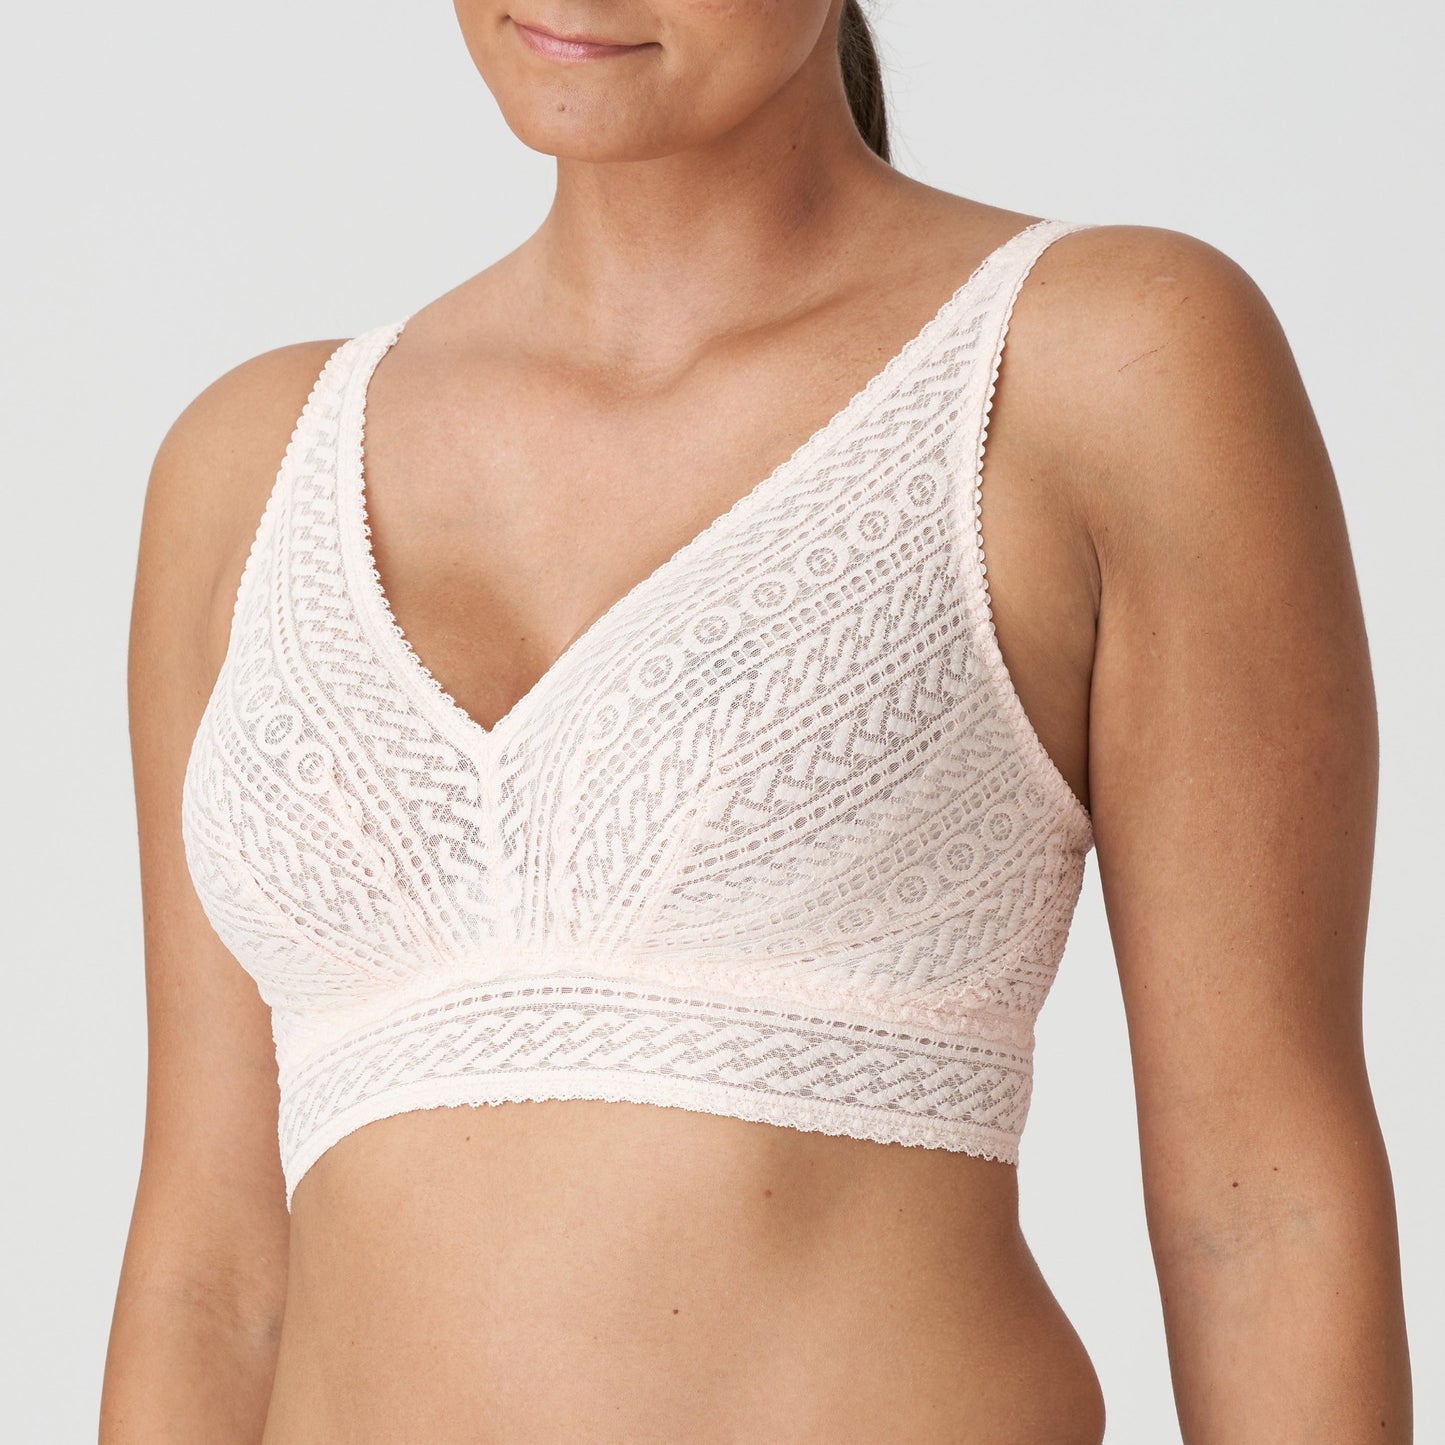 Side view of a woman wearing the Montara DD+ wireless longline full support bralette in Crystal Pink by PrimaDonna.